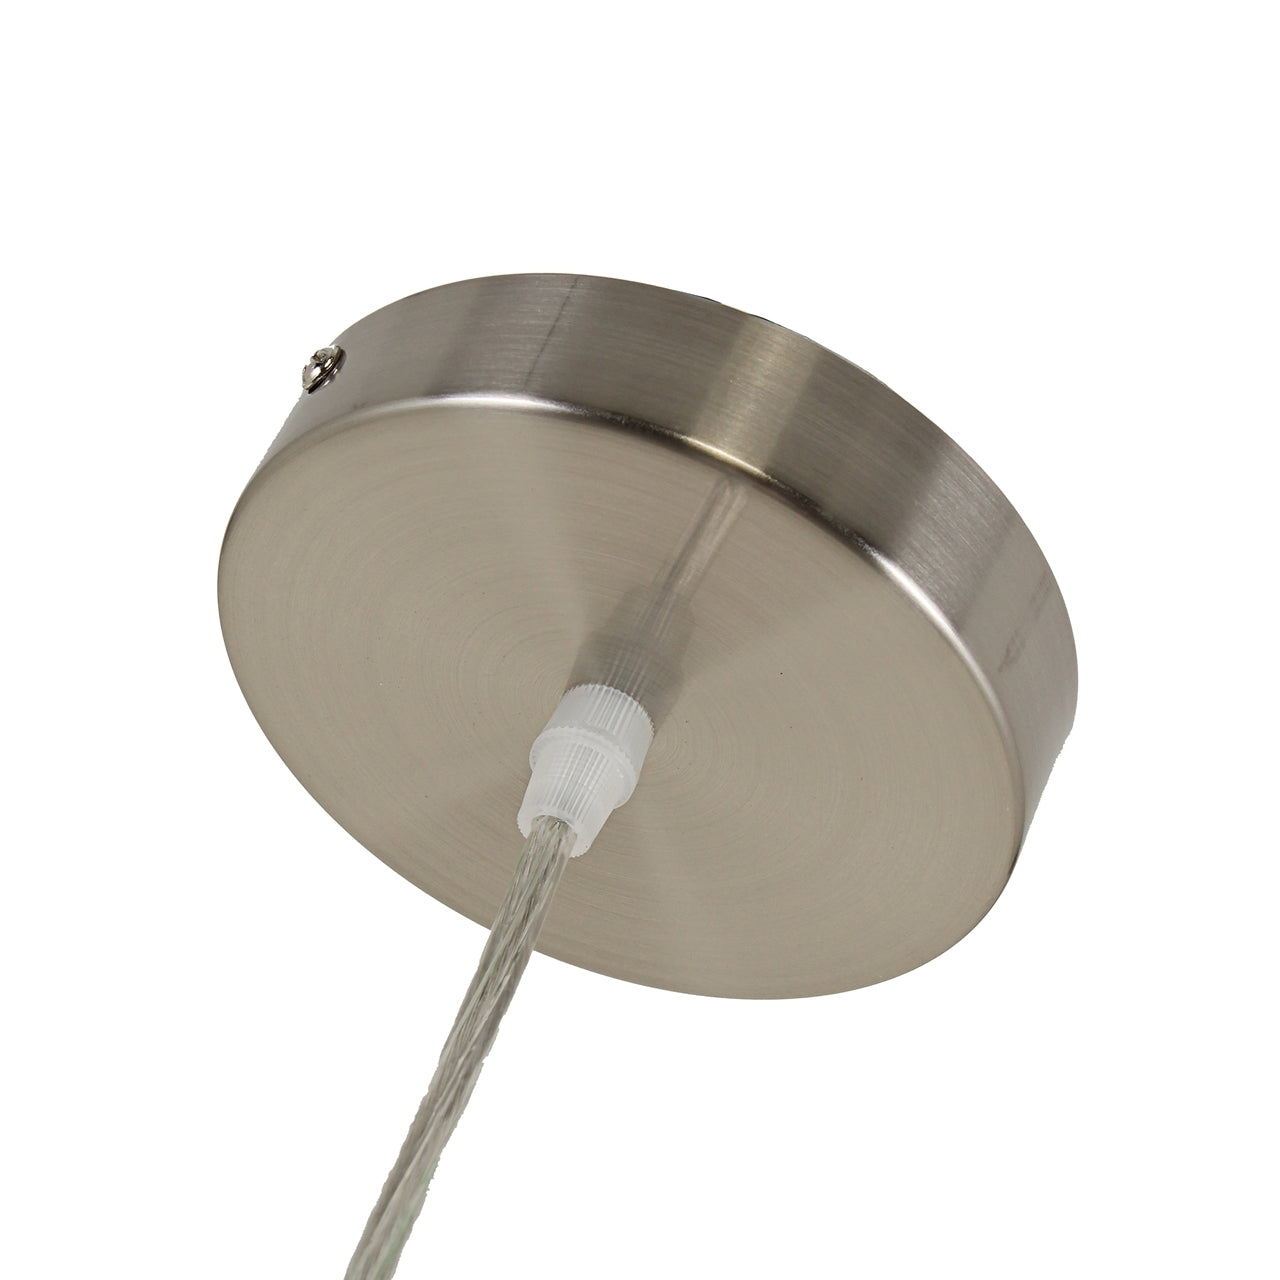 IRONCLAD Contemporary-Style 1 Light Brushed Nickel Ceiling Mini Pendant 8" Wide